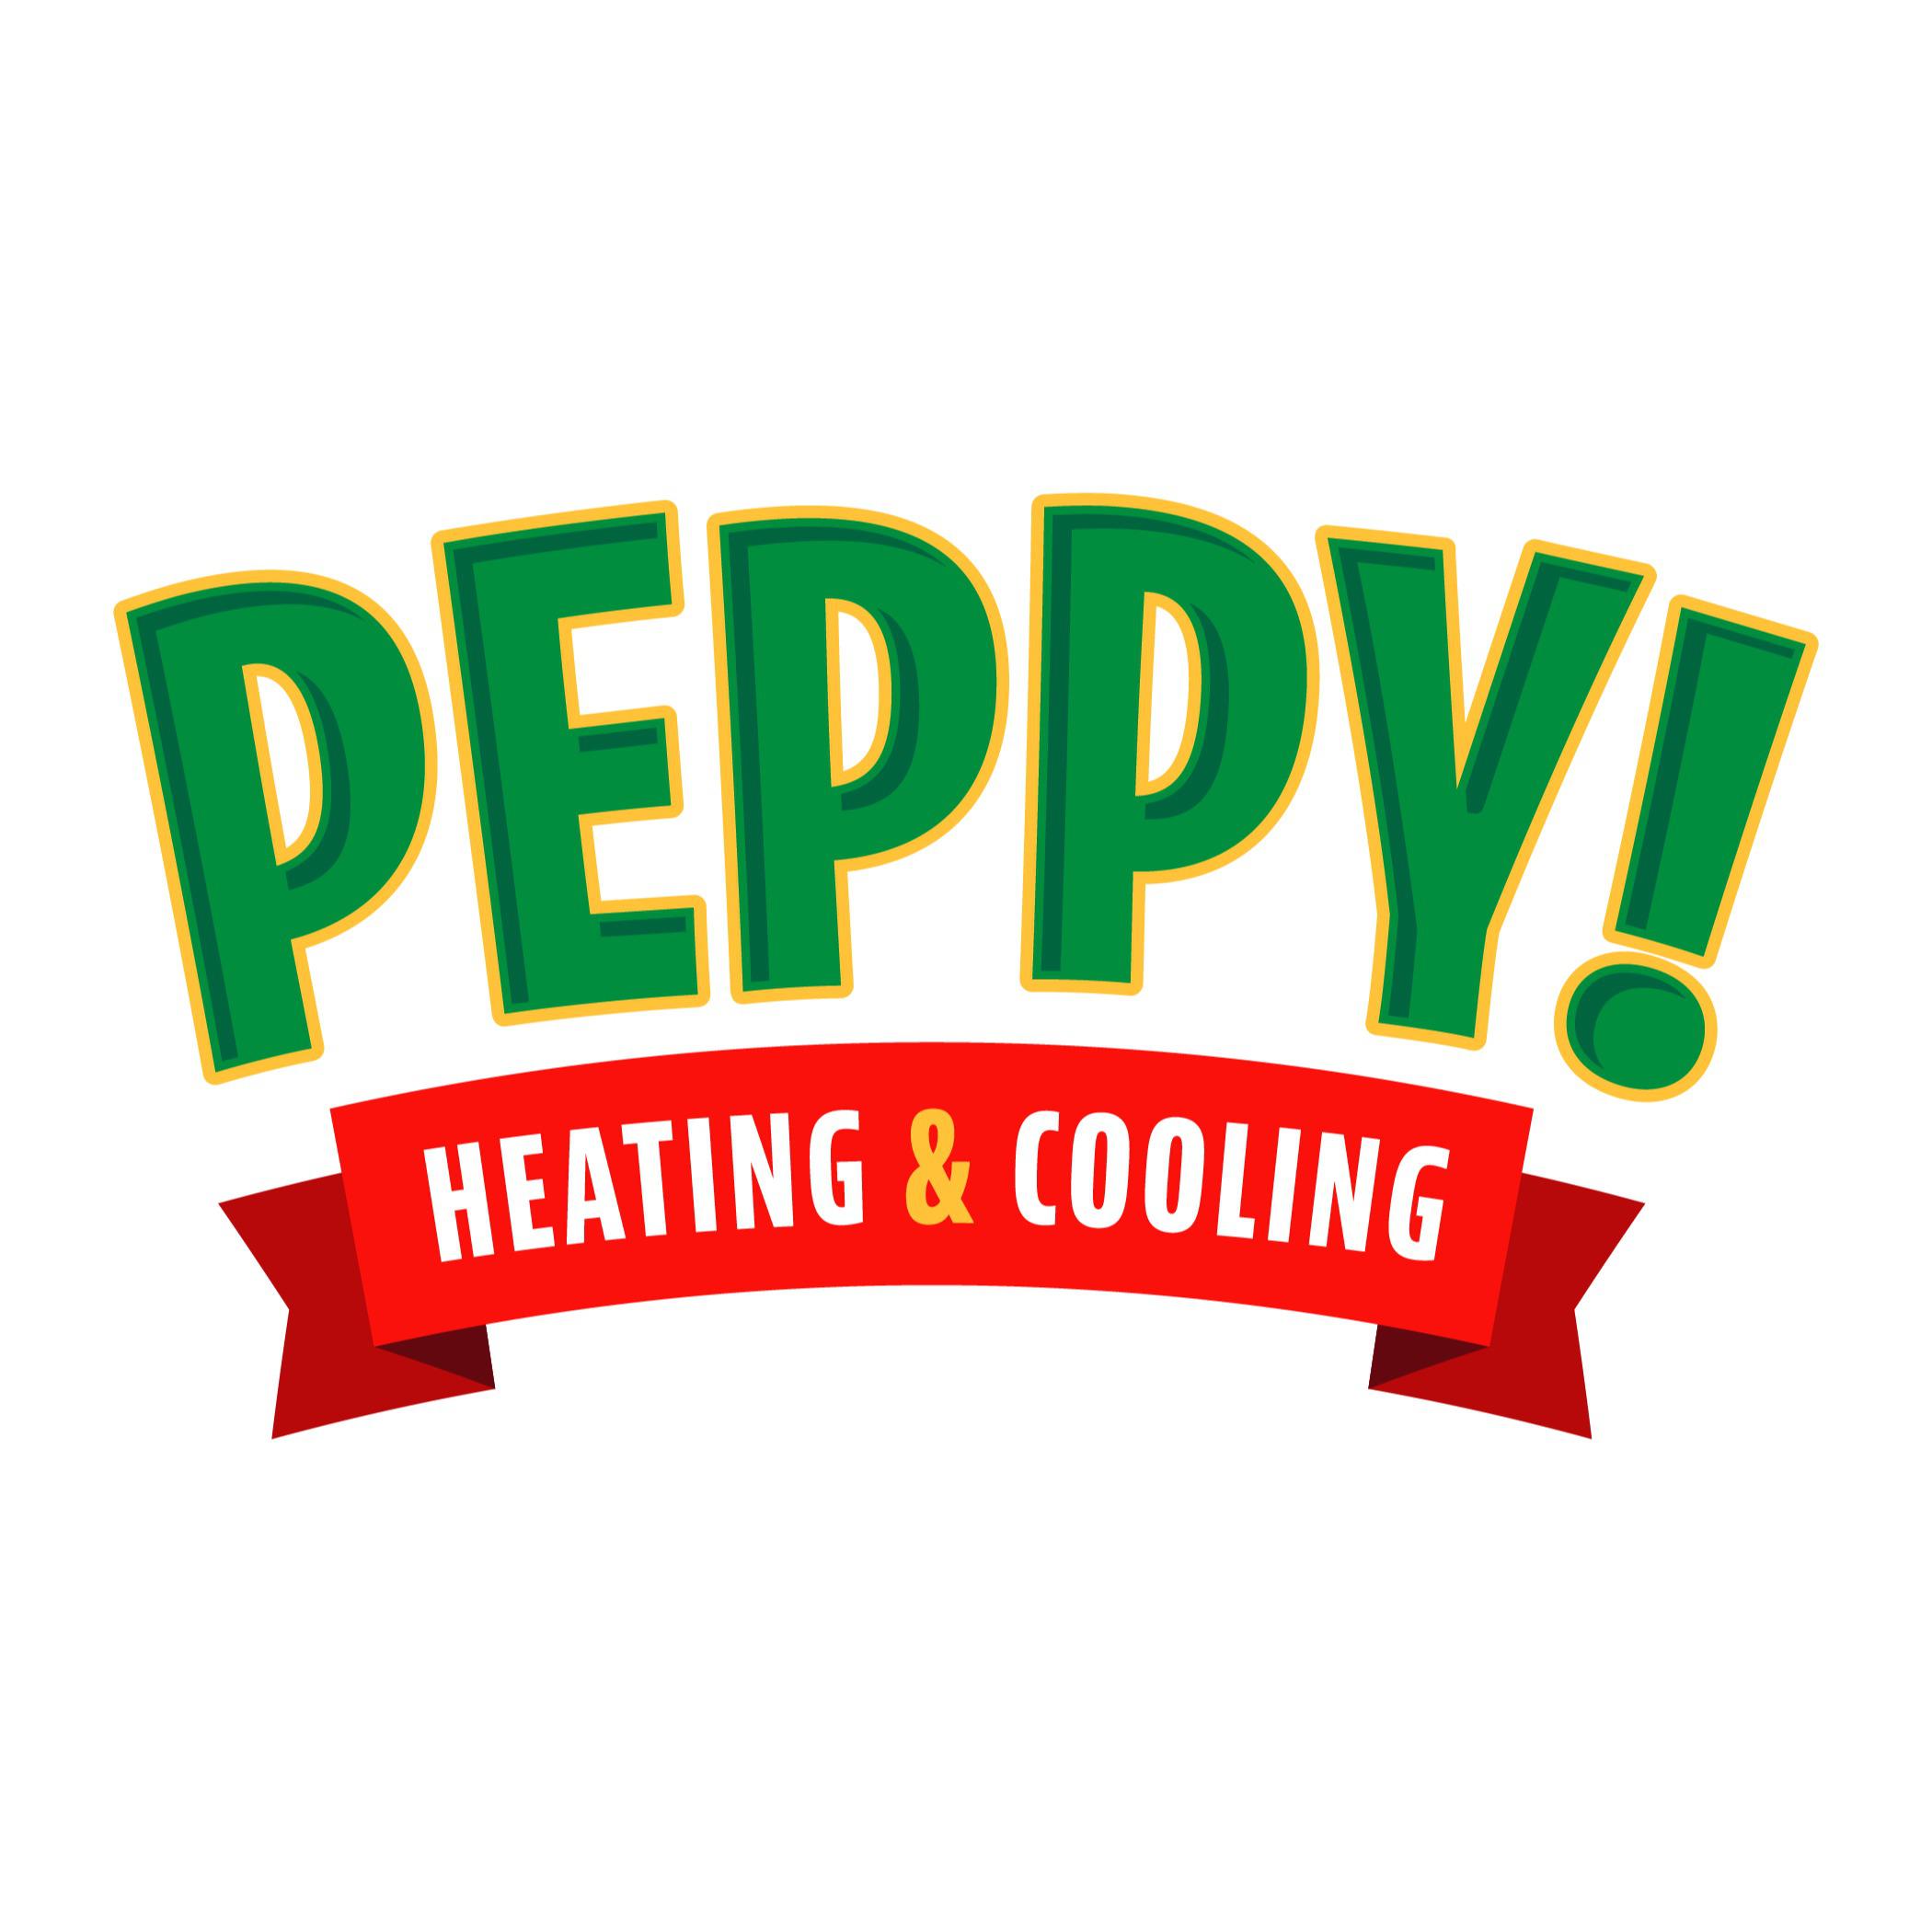 Peppy Heating & Cooling - Nampa, ID 83687 - (208)586-3525 | ShowMeLocal.com